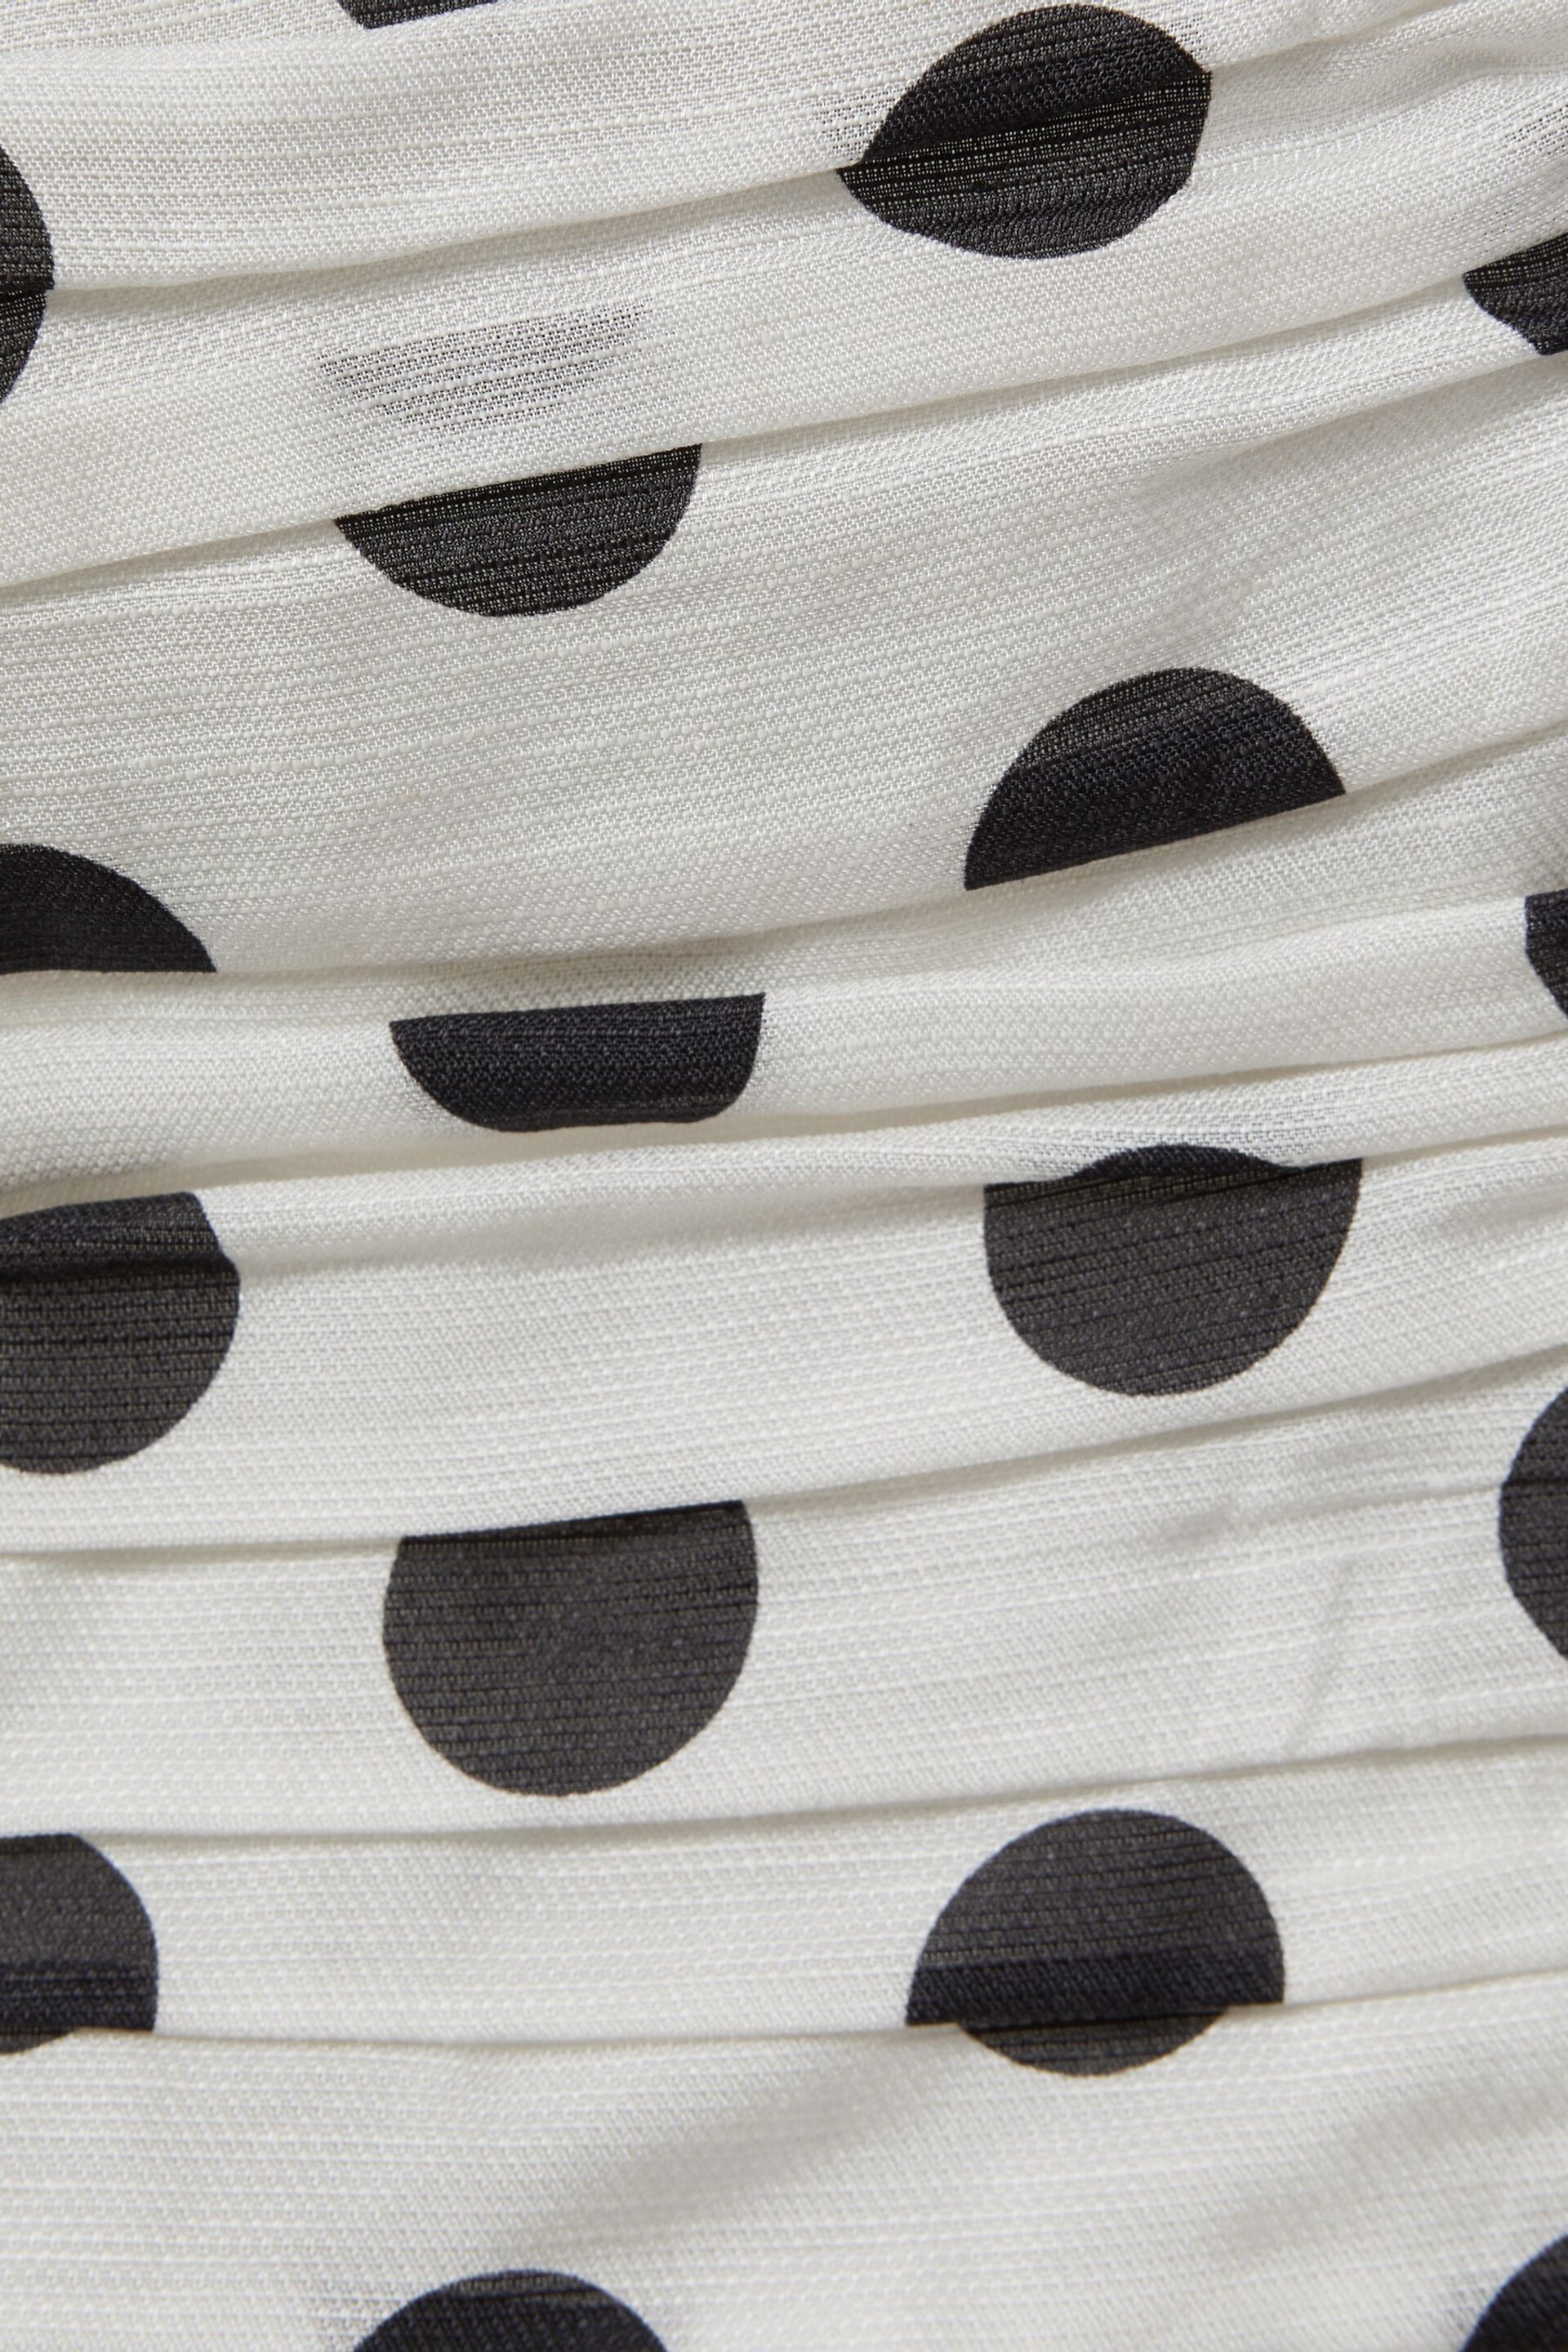 Reiss White/Black Remie Viscose Linen Polka Dot Ruched Strapless Top - Image 6 of 6